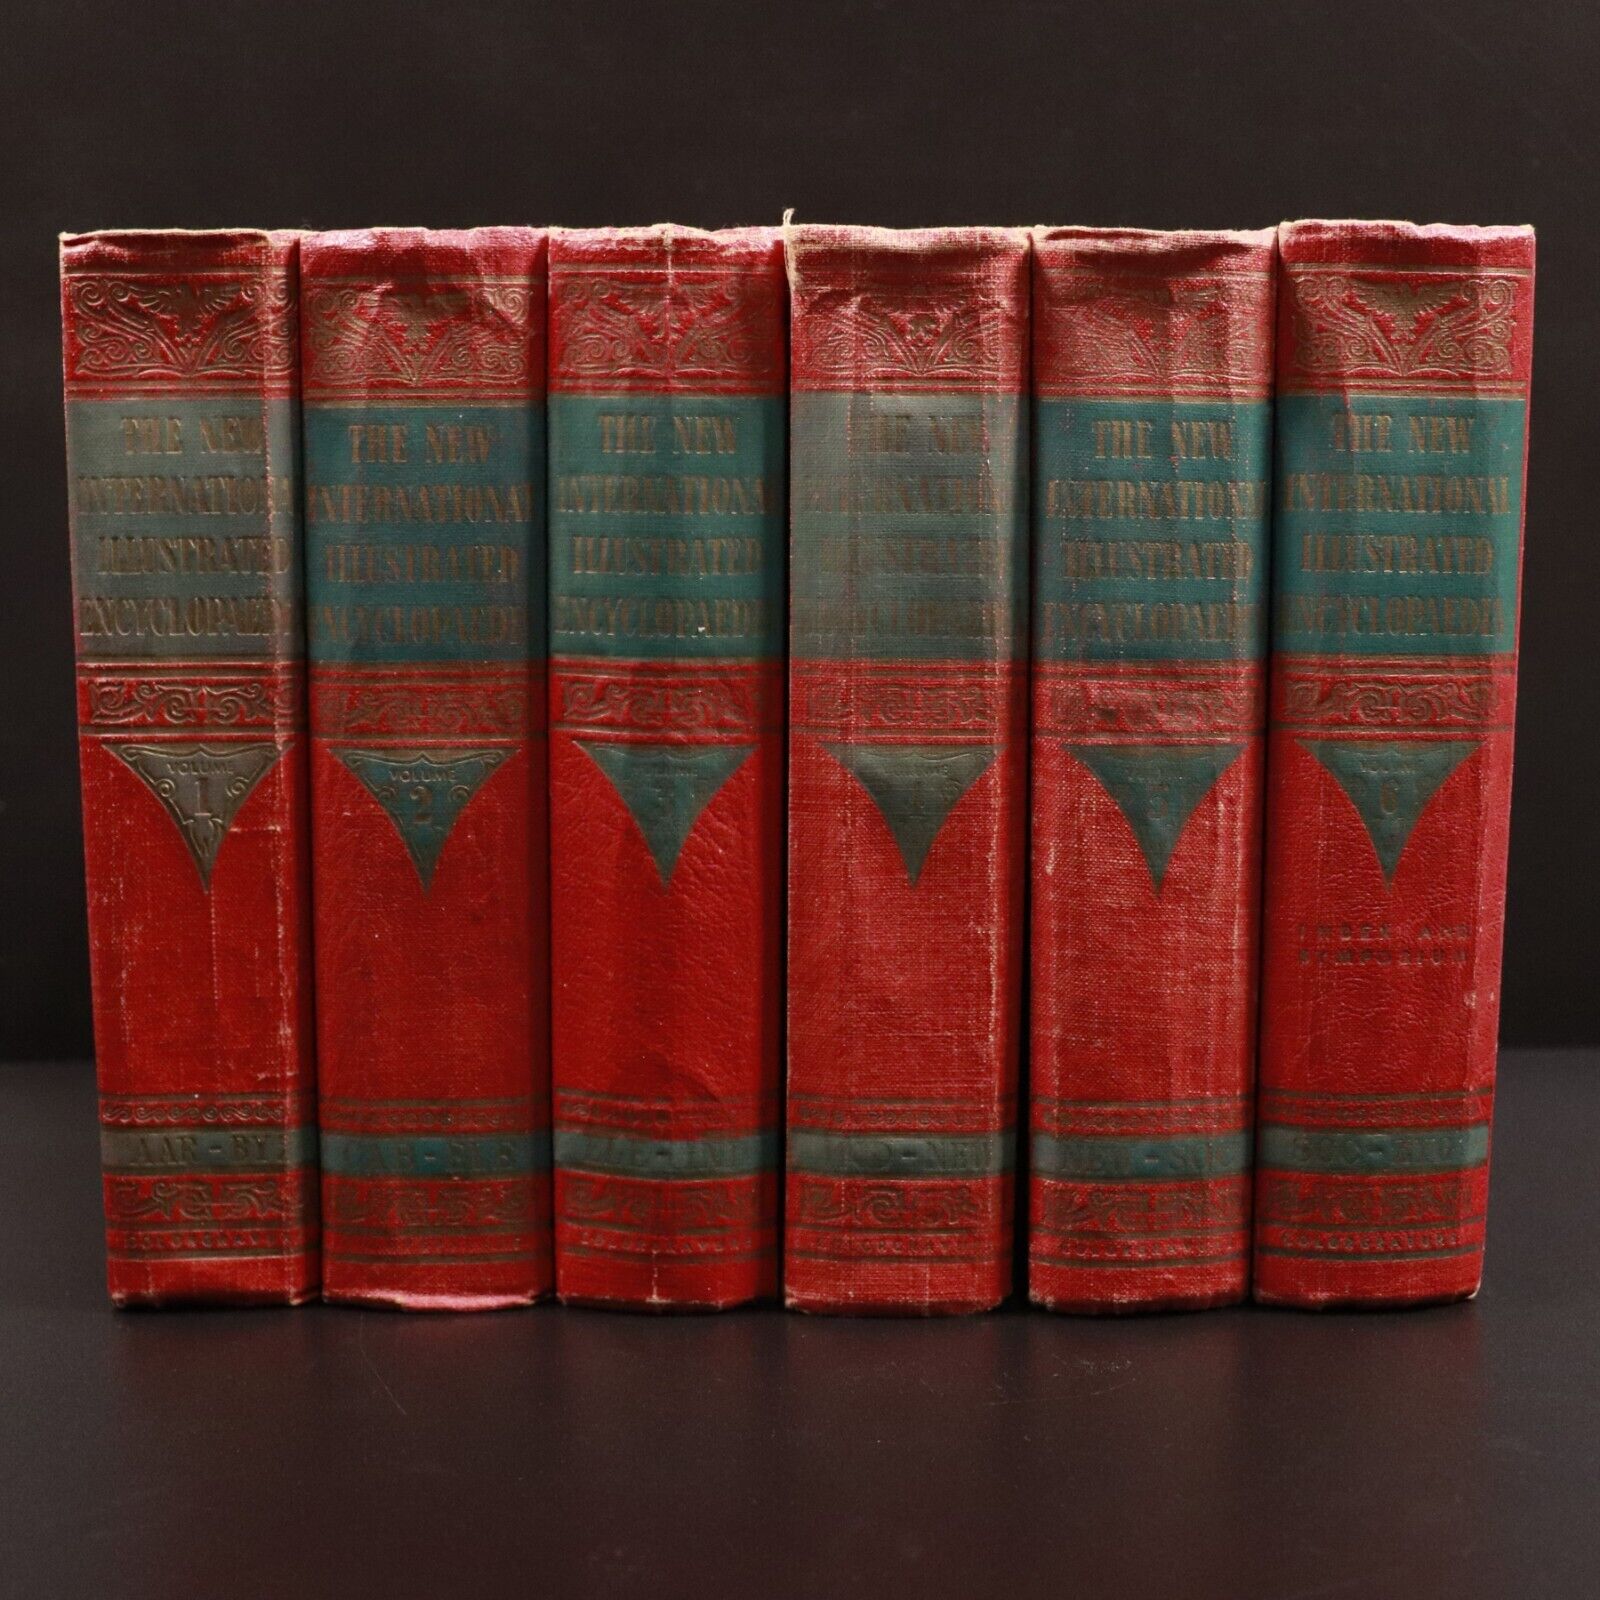 1954 6vol The New International Illustrated Encyclopaedia Reference Book Set